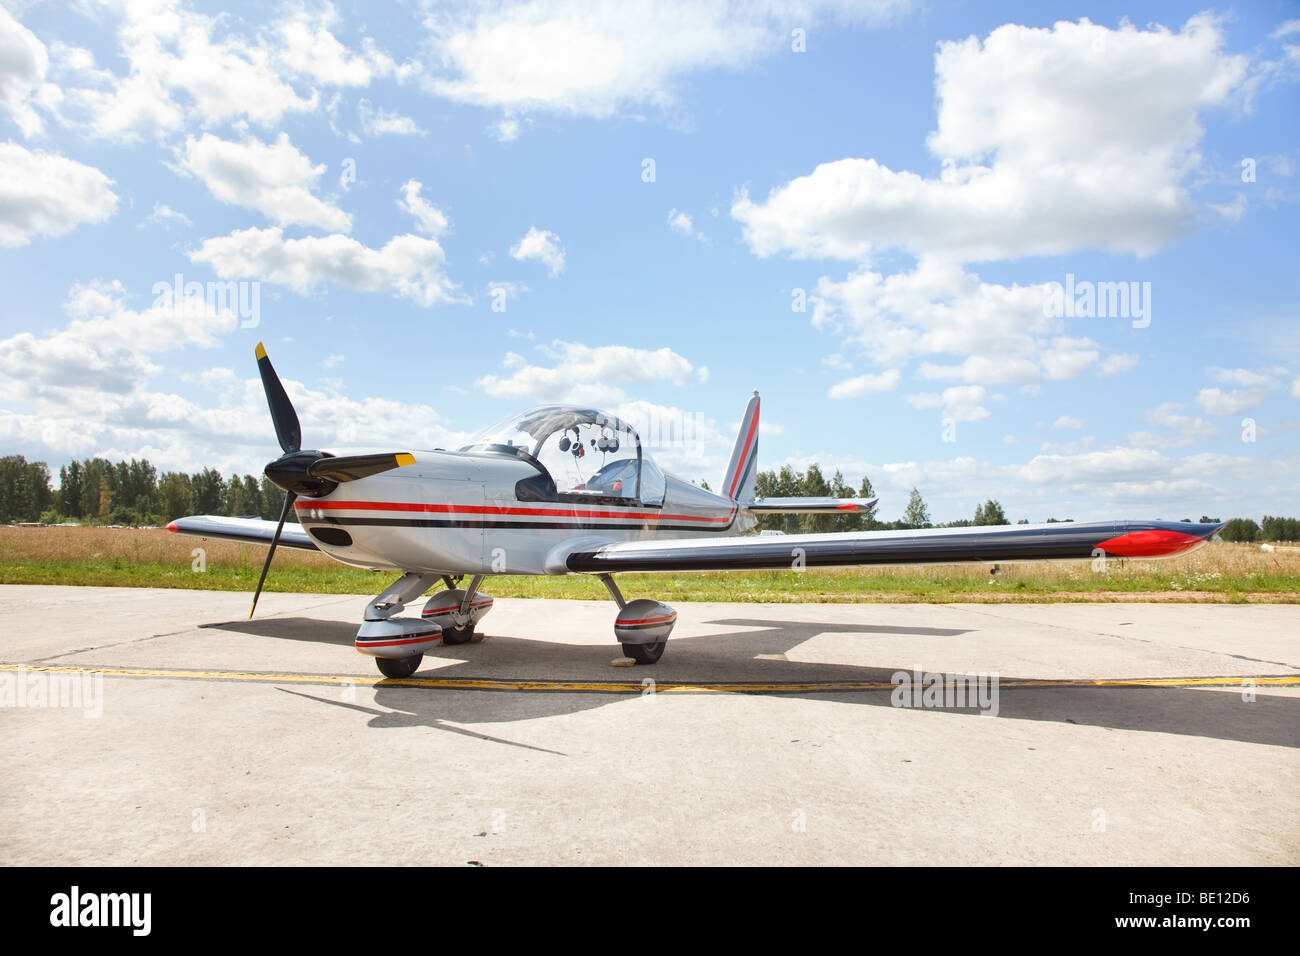 Small lightweight private airplane standing on landing strip in airfield Stock Photo